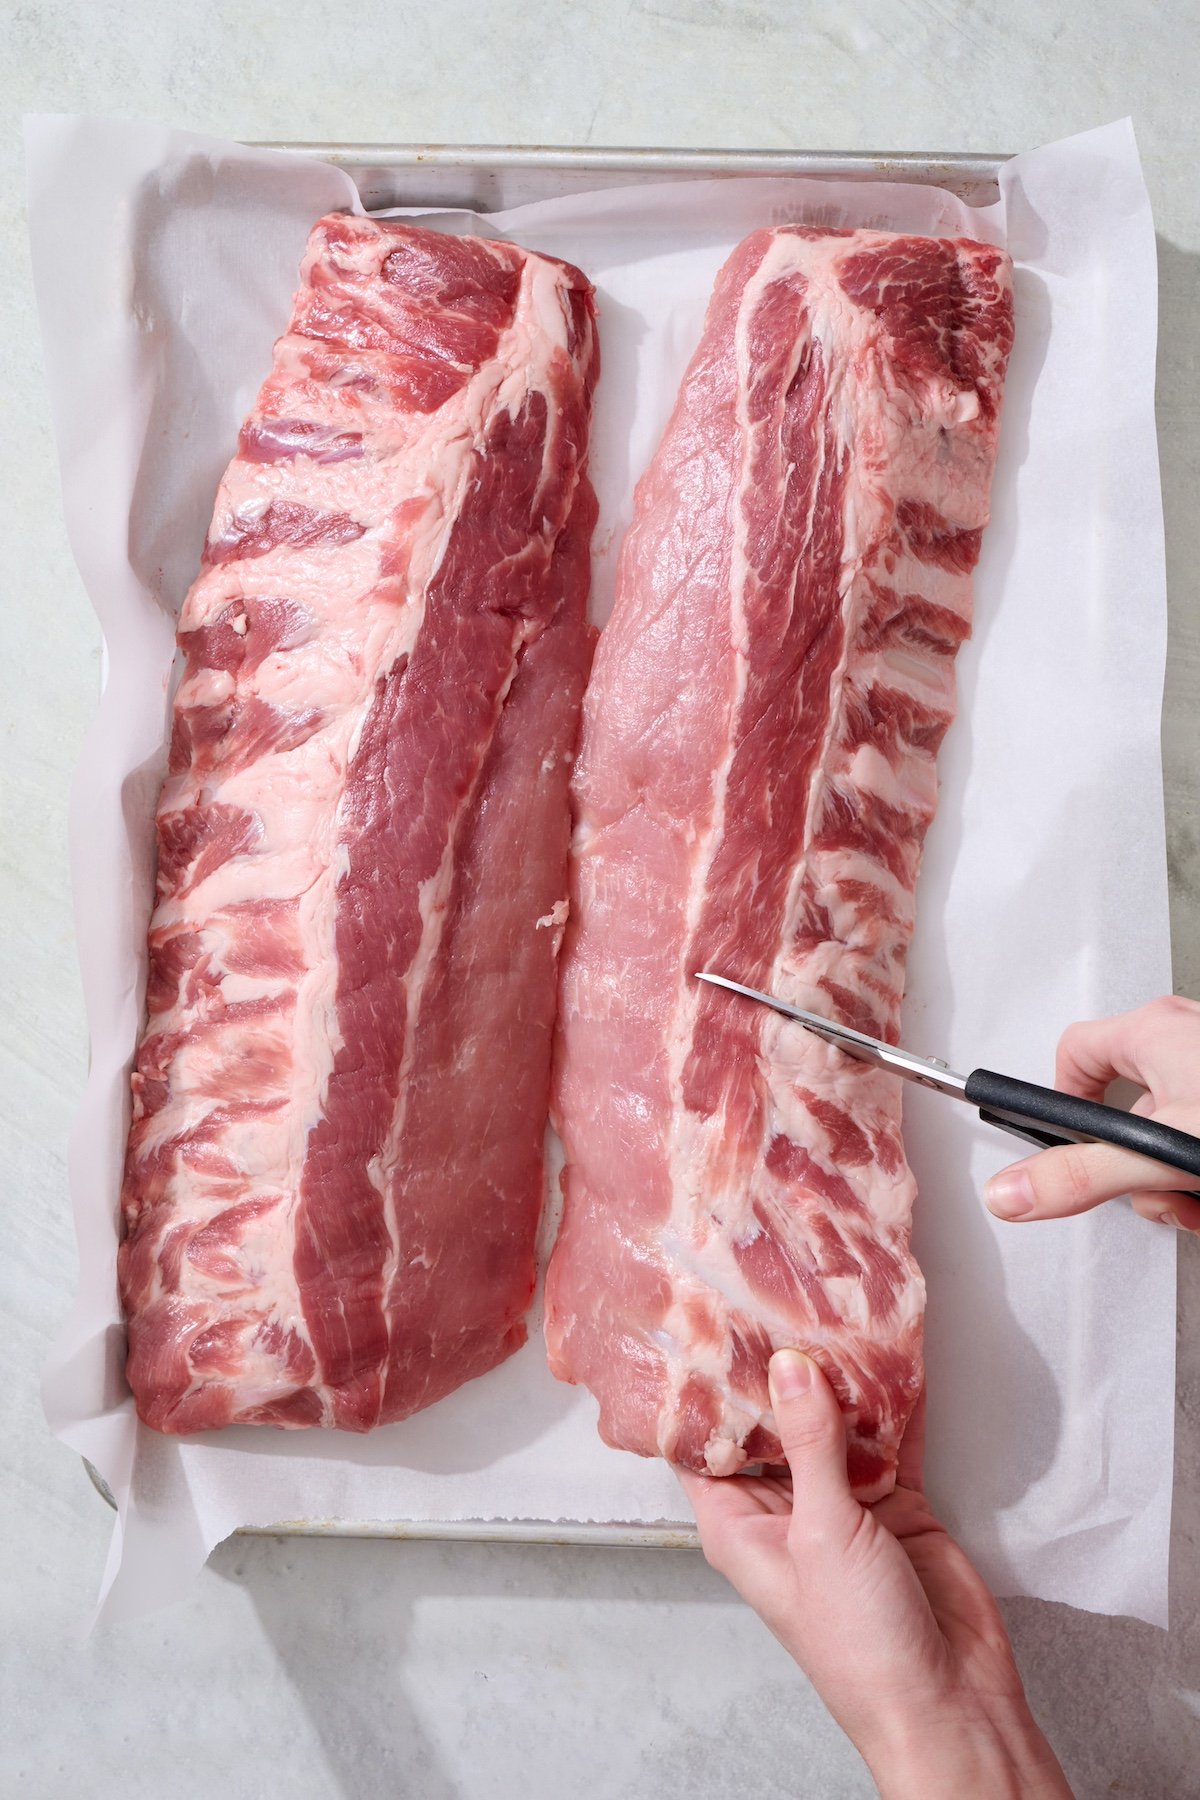 Cutting baby back ribs into smaller portions.